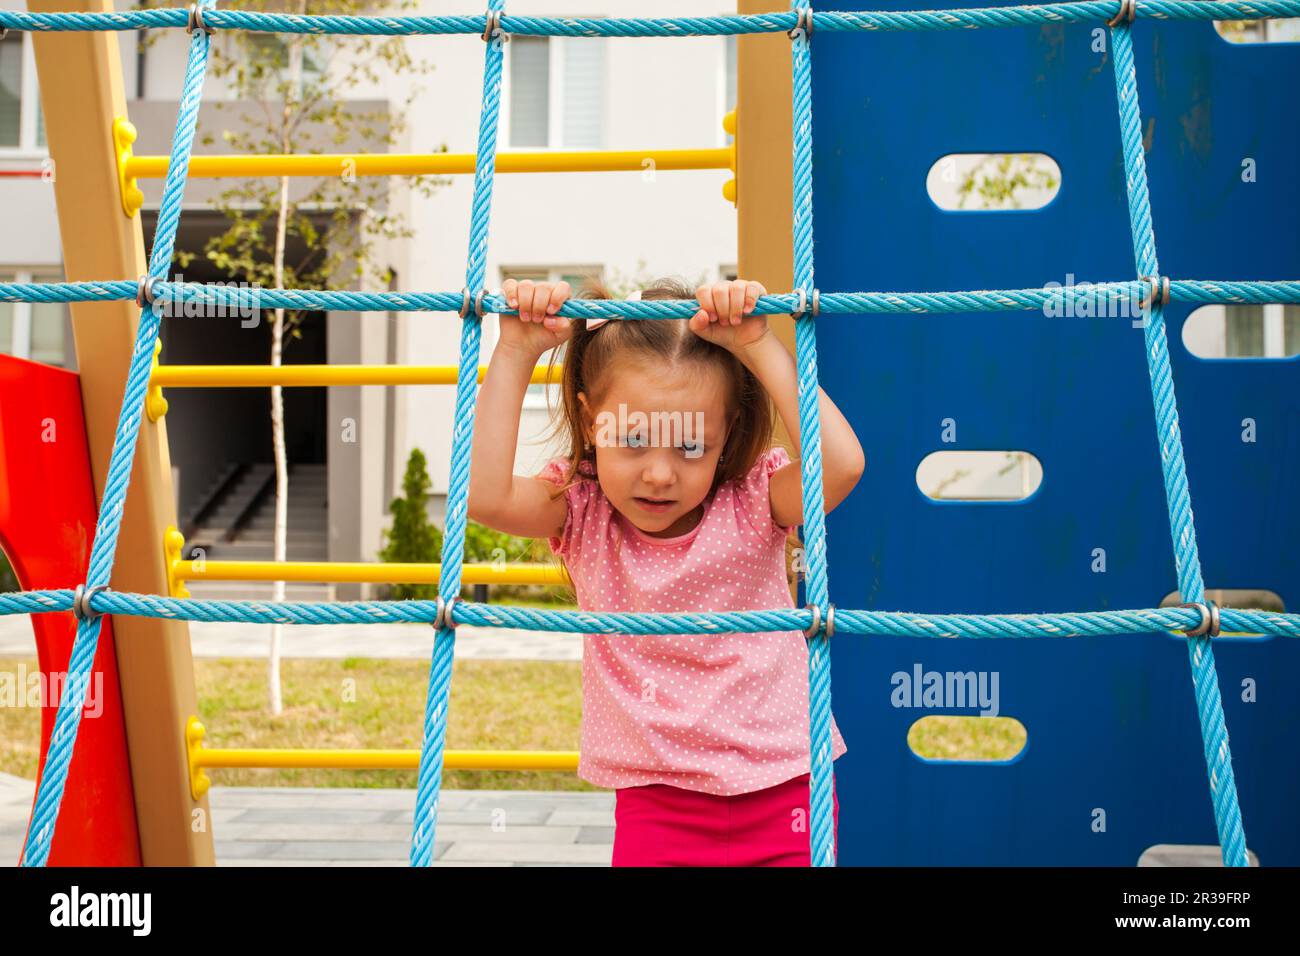 Adorable child girl playing on outdoors playground. Stock Photo